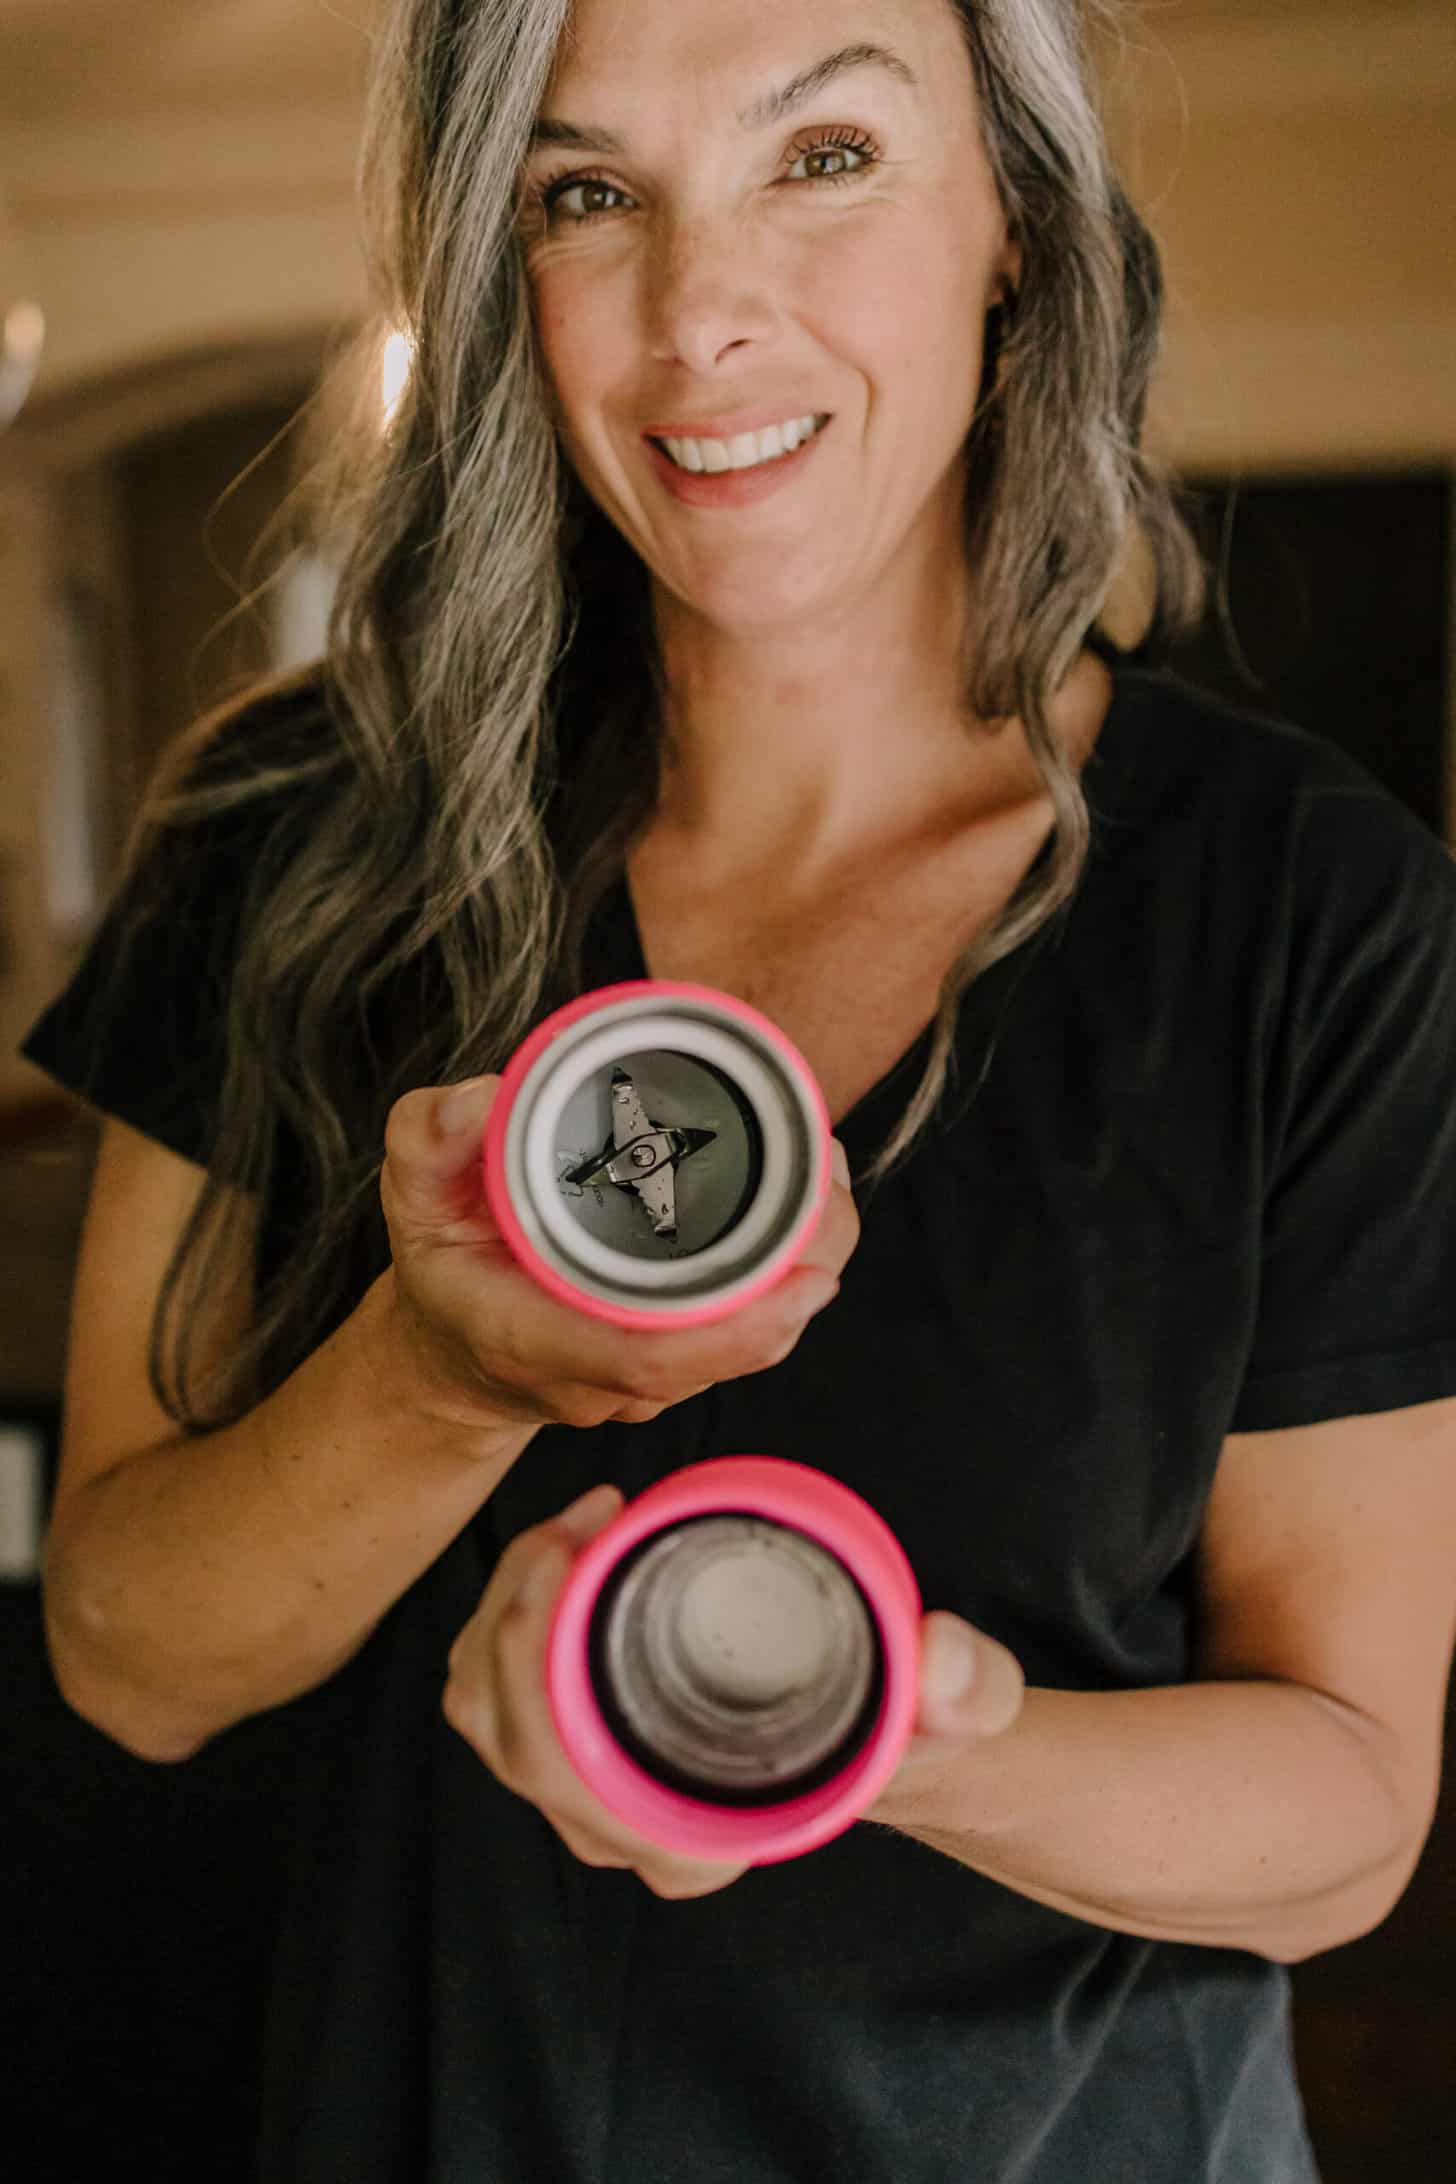 a woman with long gray hair holds up a hot pink portable blender so that the inside of it is visible